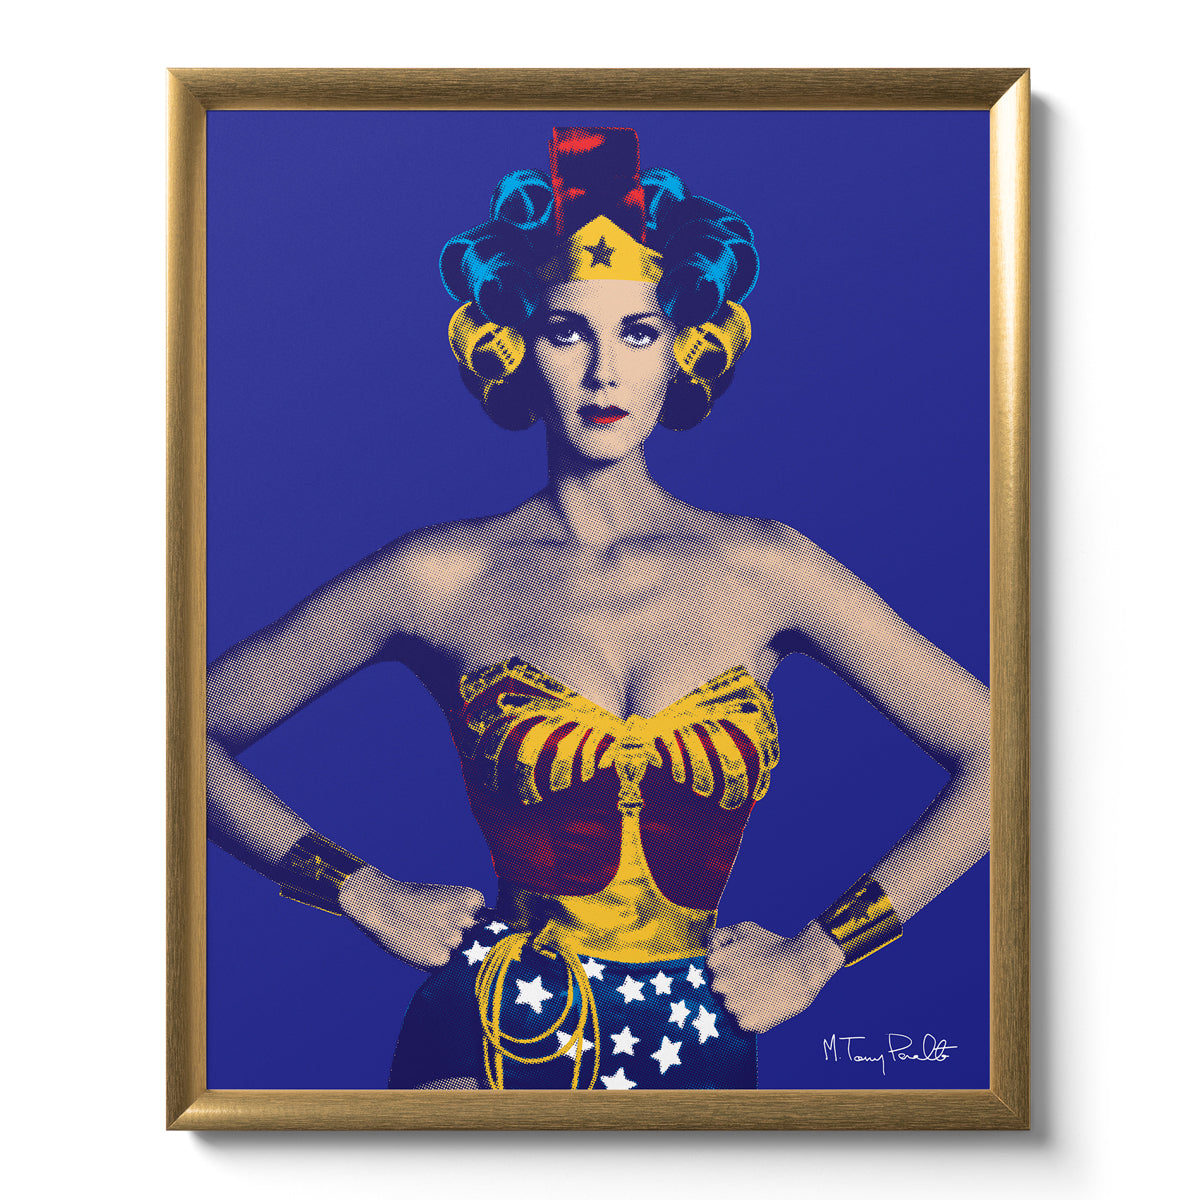 WONDER WOMAN ROLOS 16x20 – CON POSTER Peralta Project (COBALT)